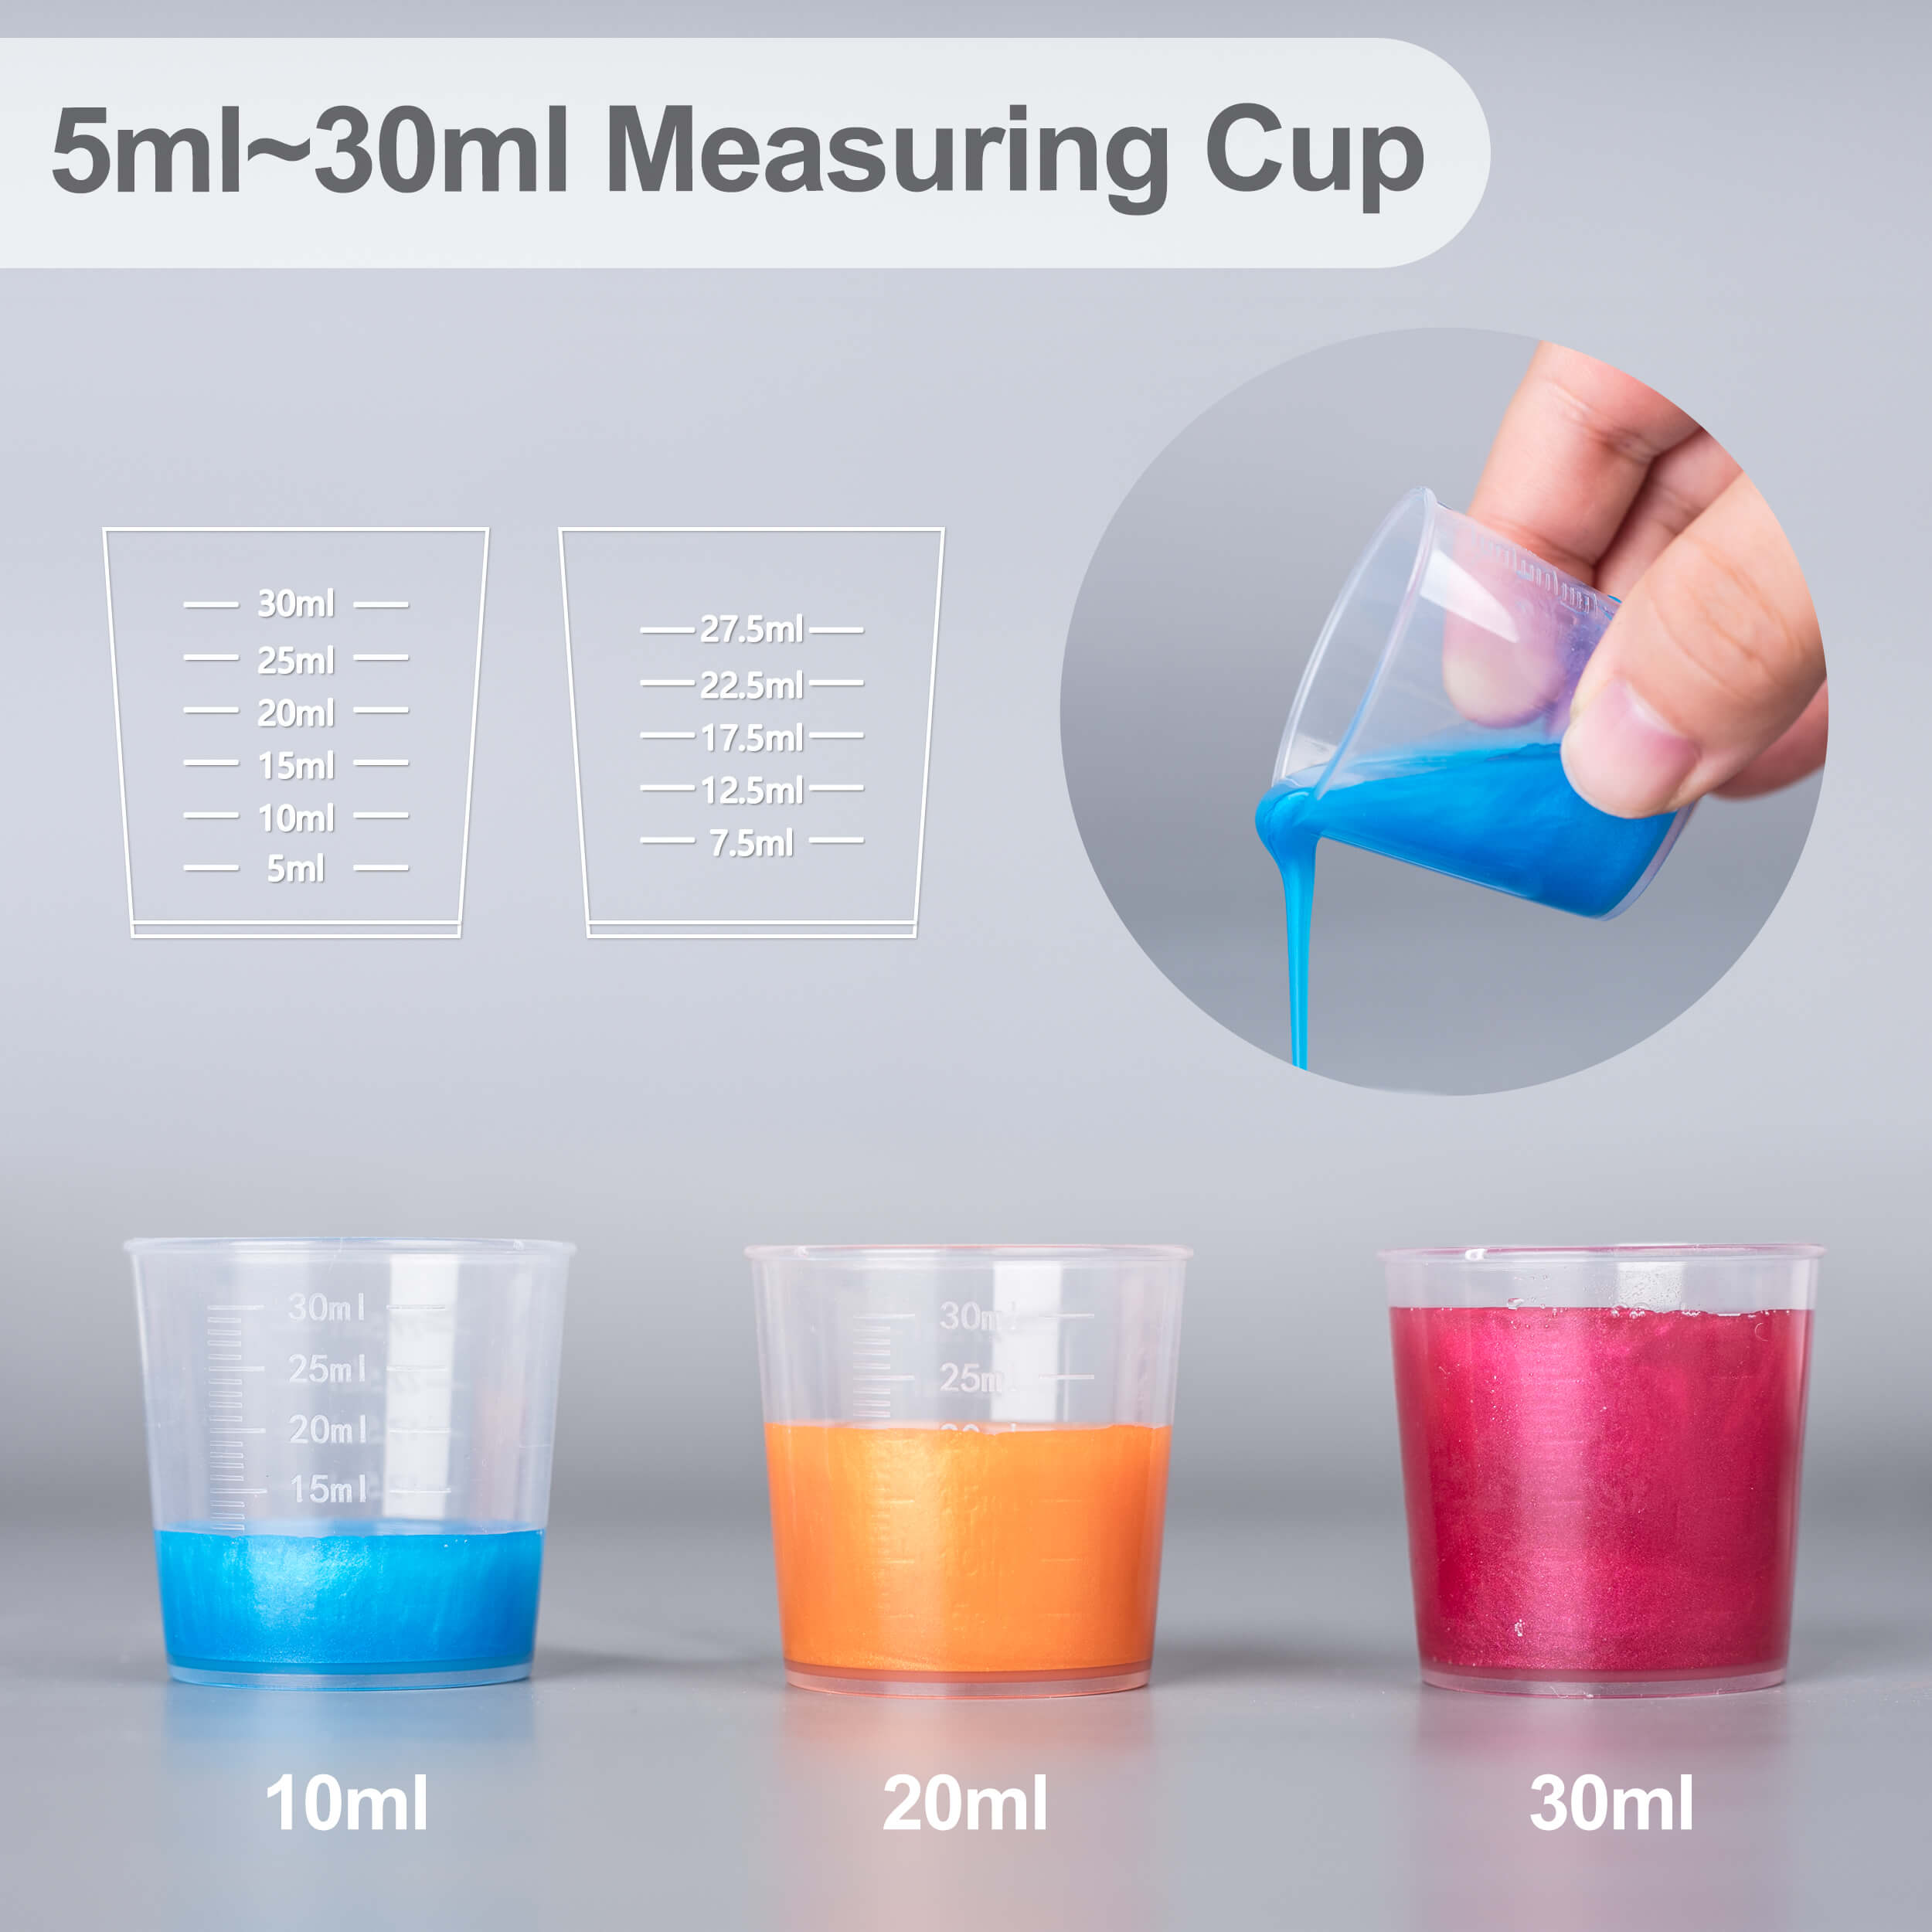 How to Reas a Mixing cup for Epoxy Resin, Resin Epoxy